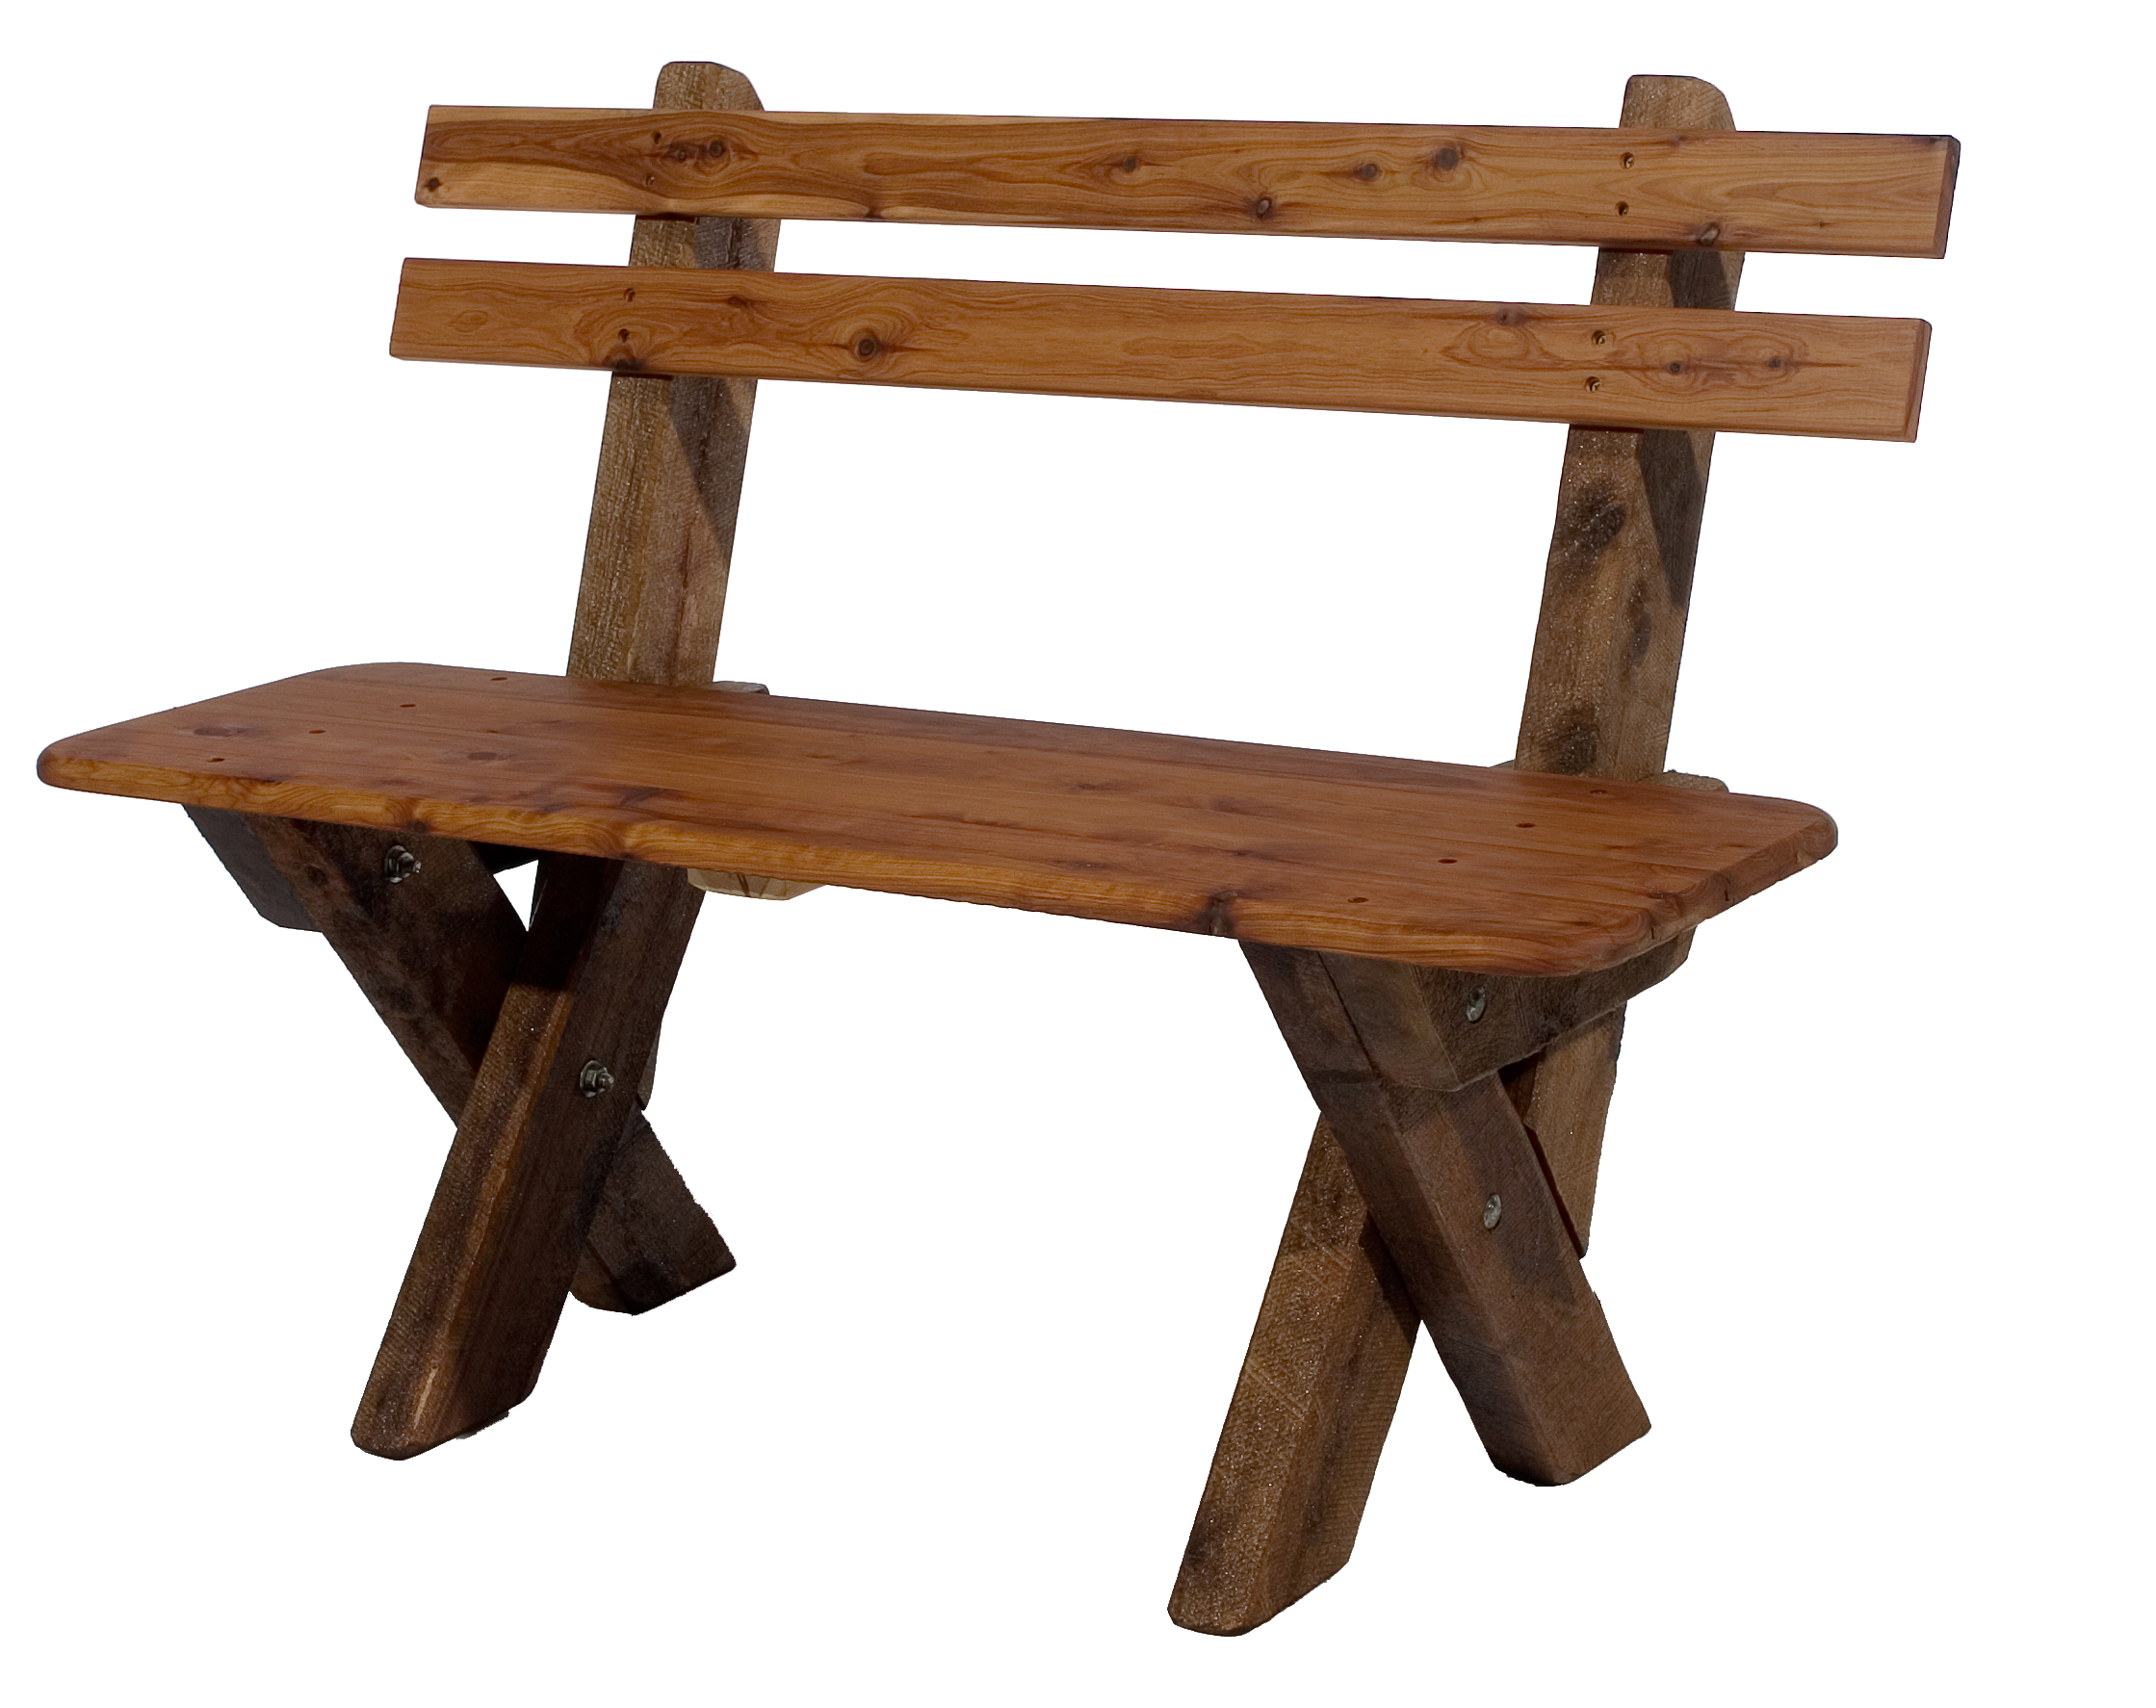 2 Seat Slat Back Cypress Outdoor Timber Bench available to order now